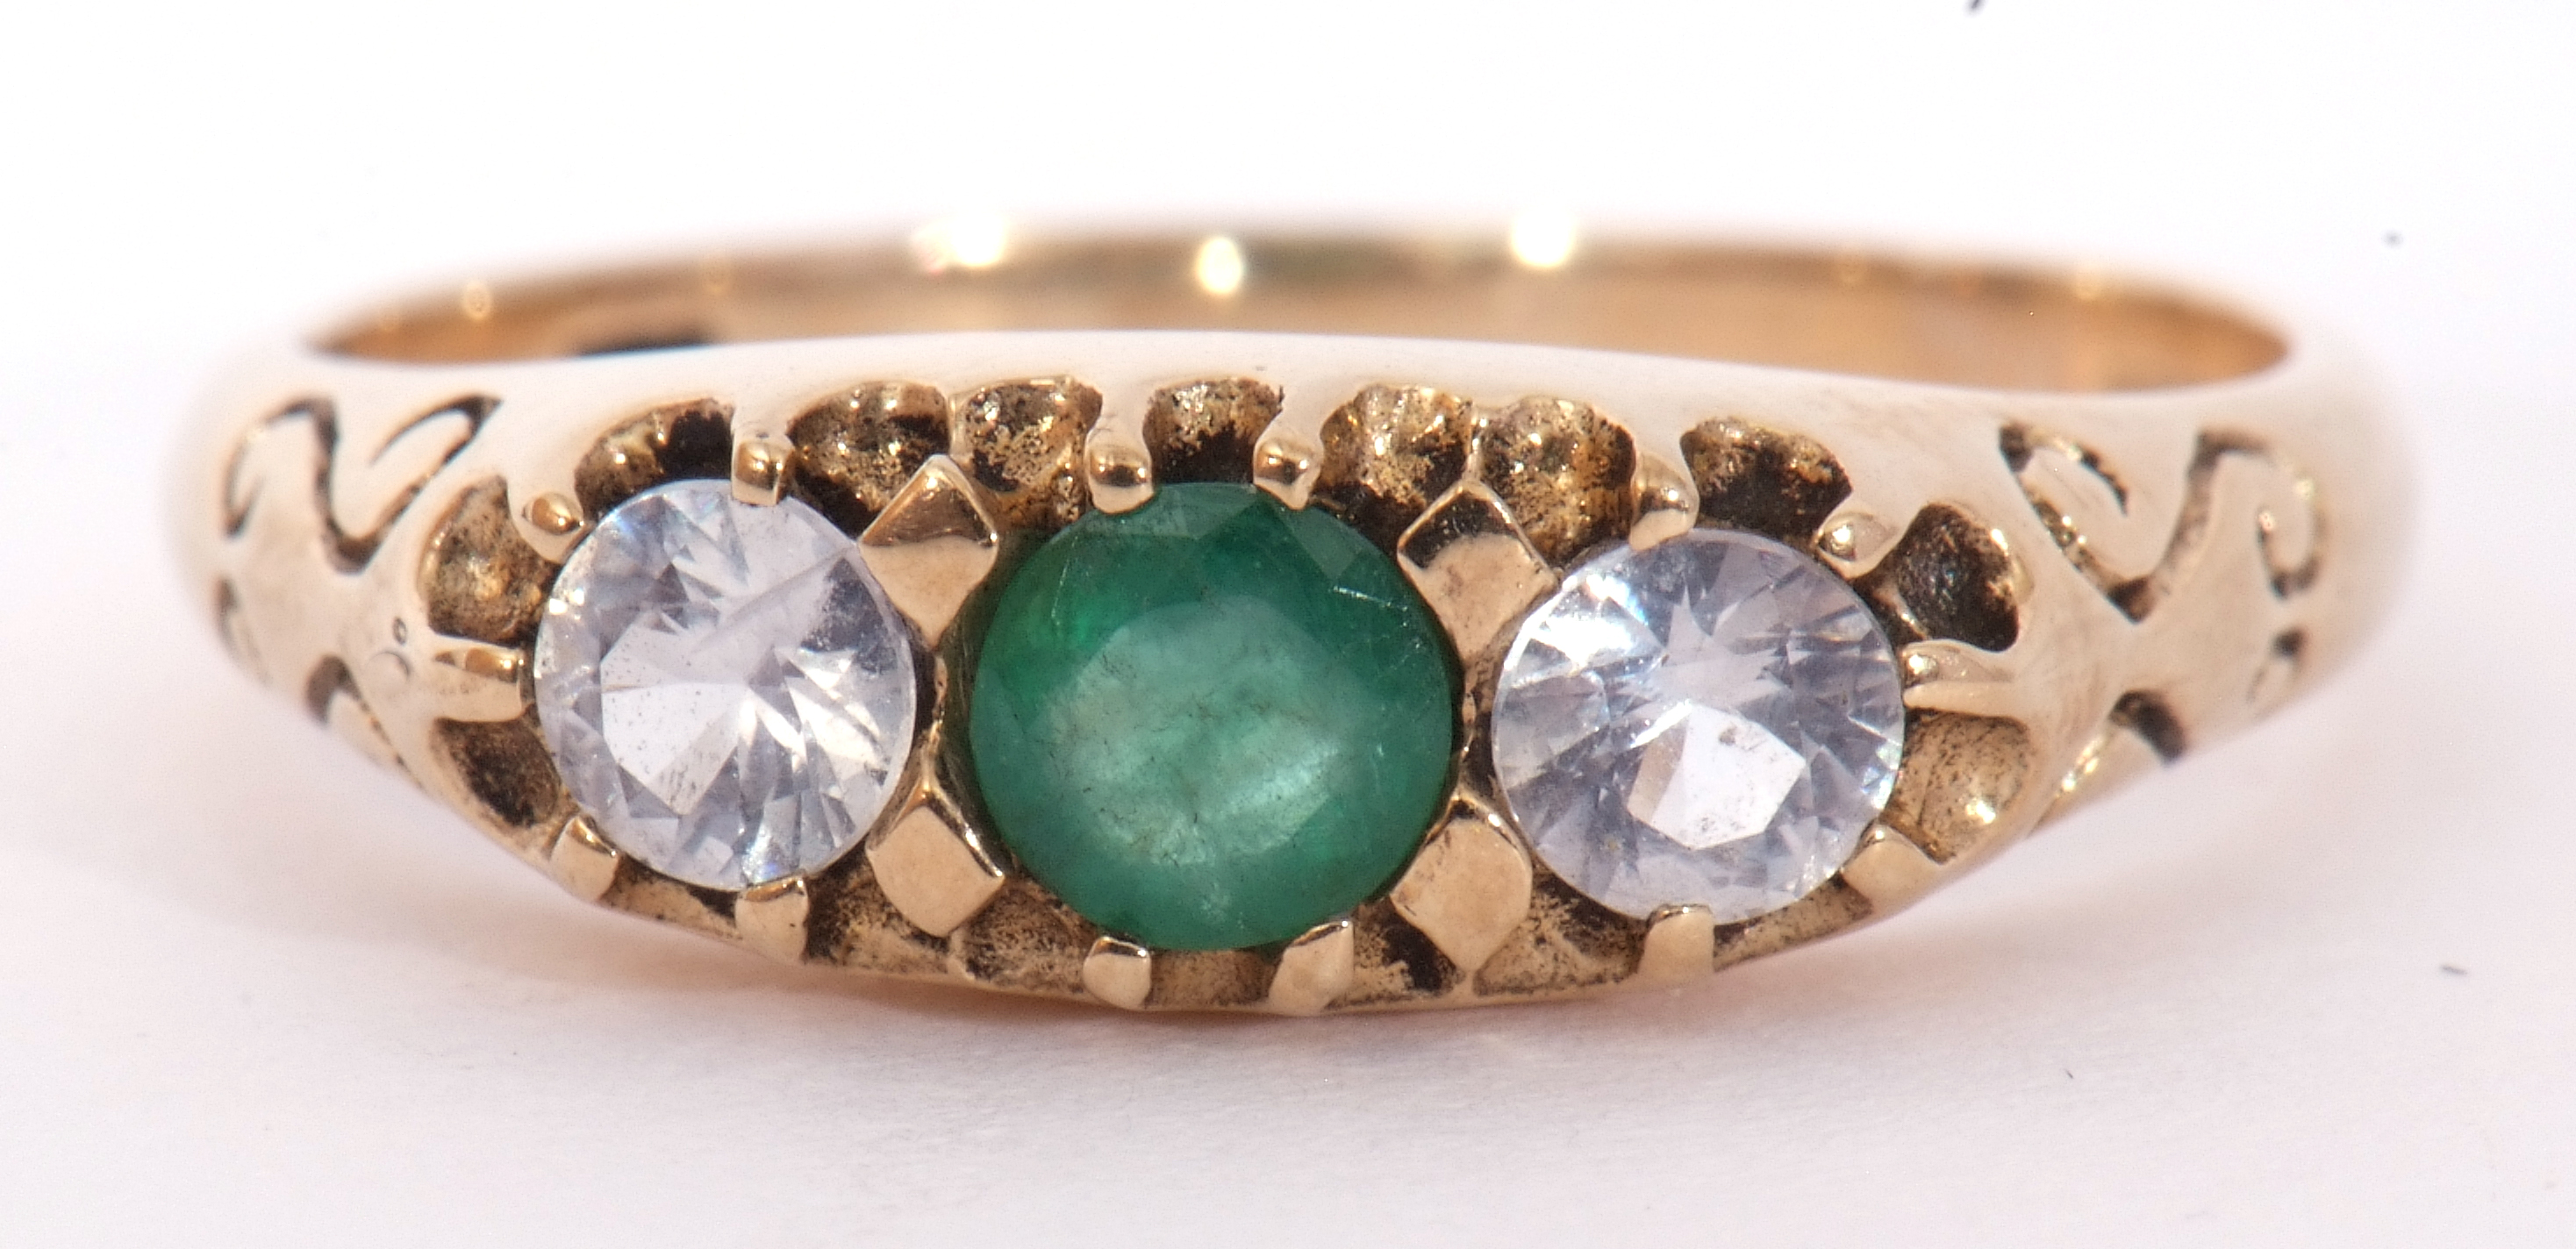 Modern 9ct gold paste set ring centring a green coloured stone between two pastes - Image 6 of 10